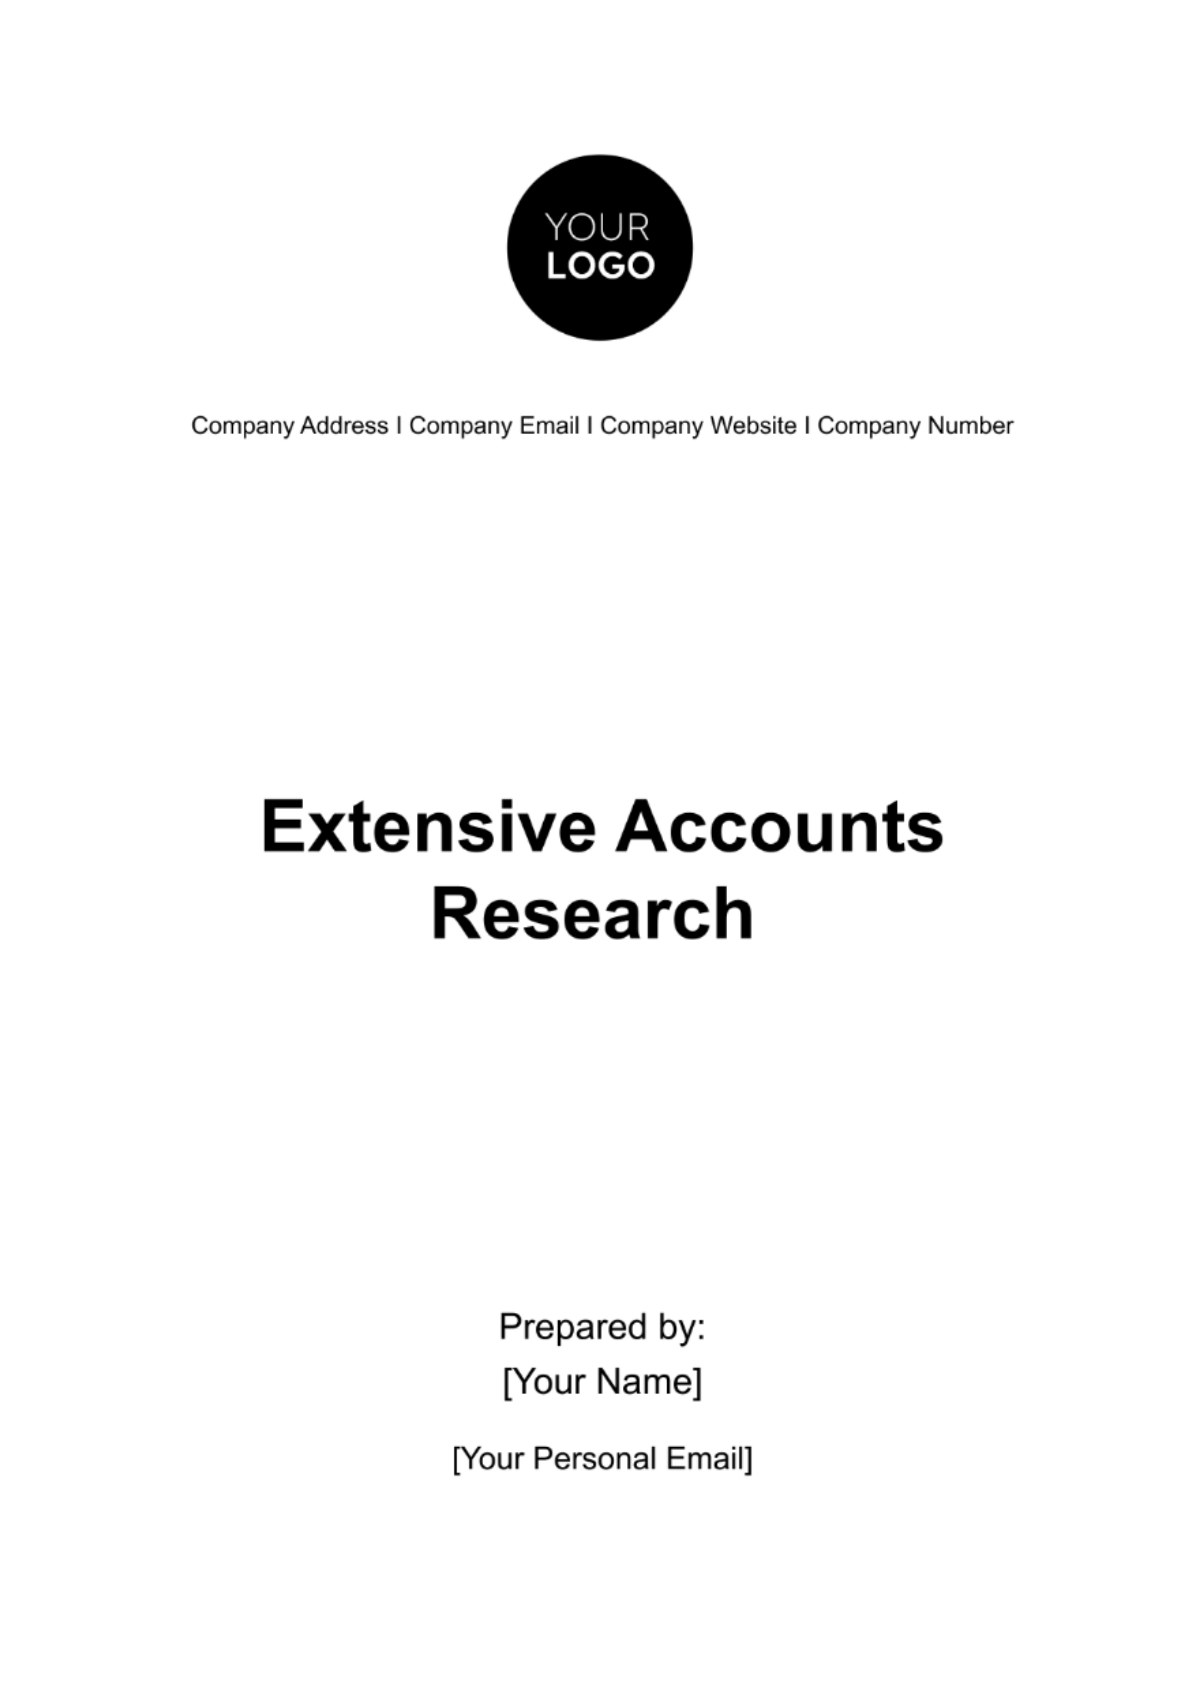 Extensive Accounts Research Template